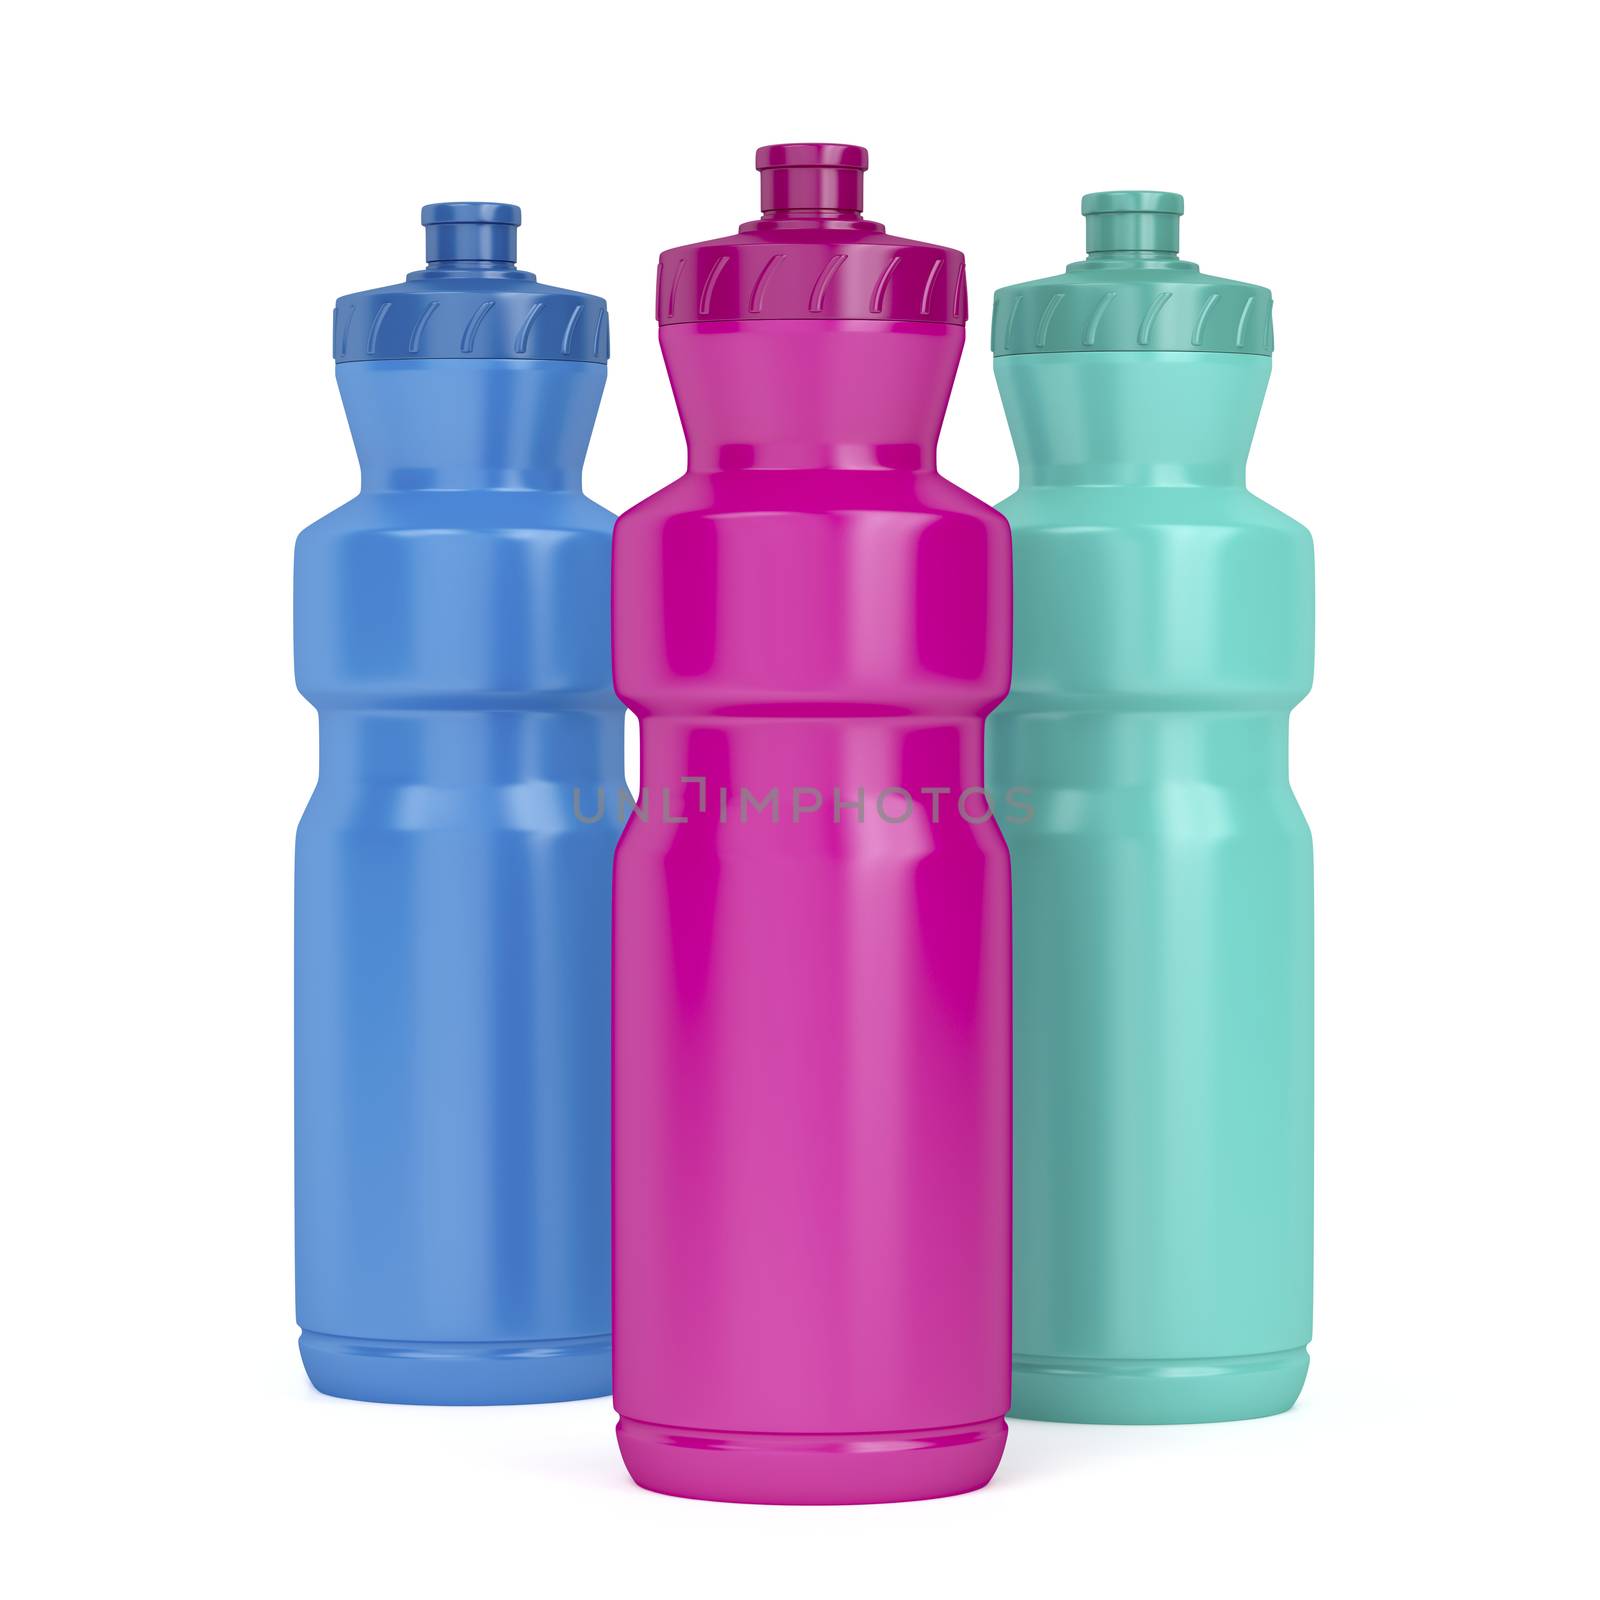 Three sport plastic bottles with different colors 